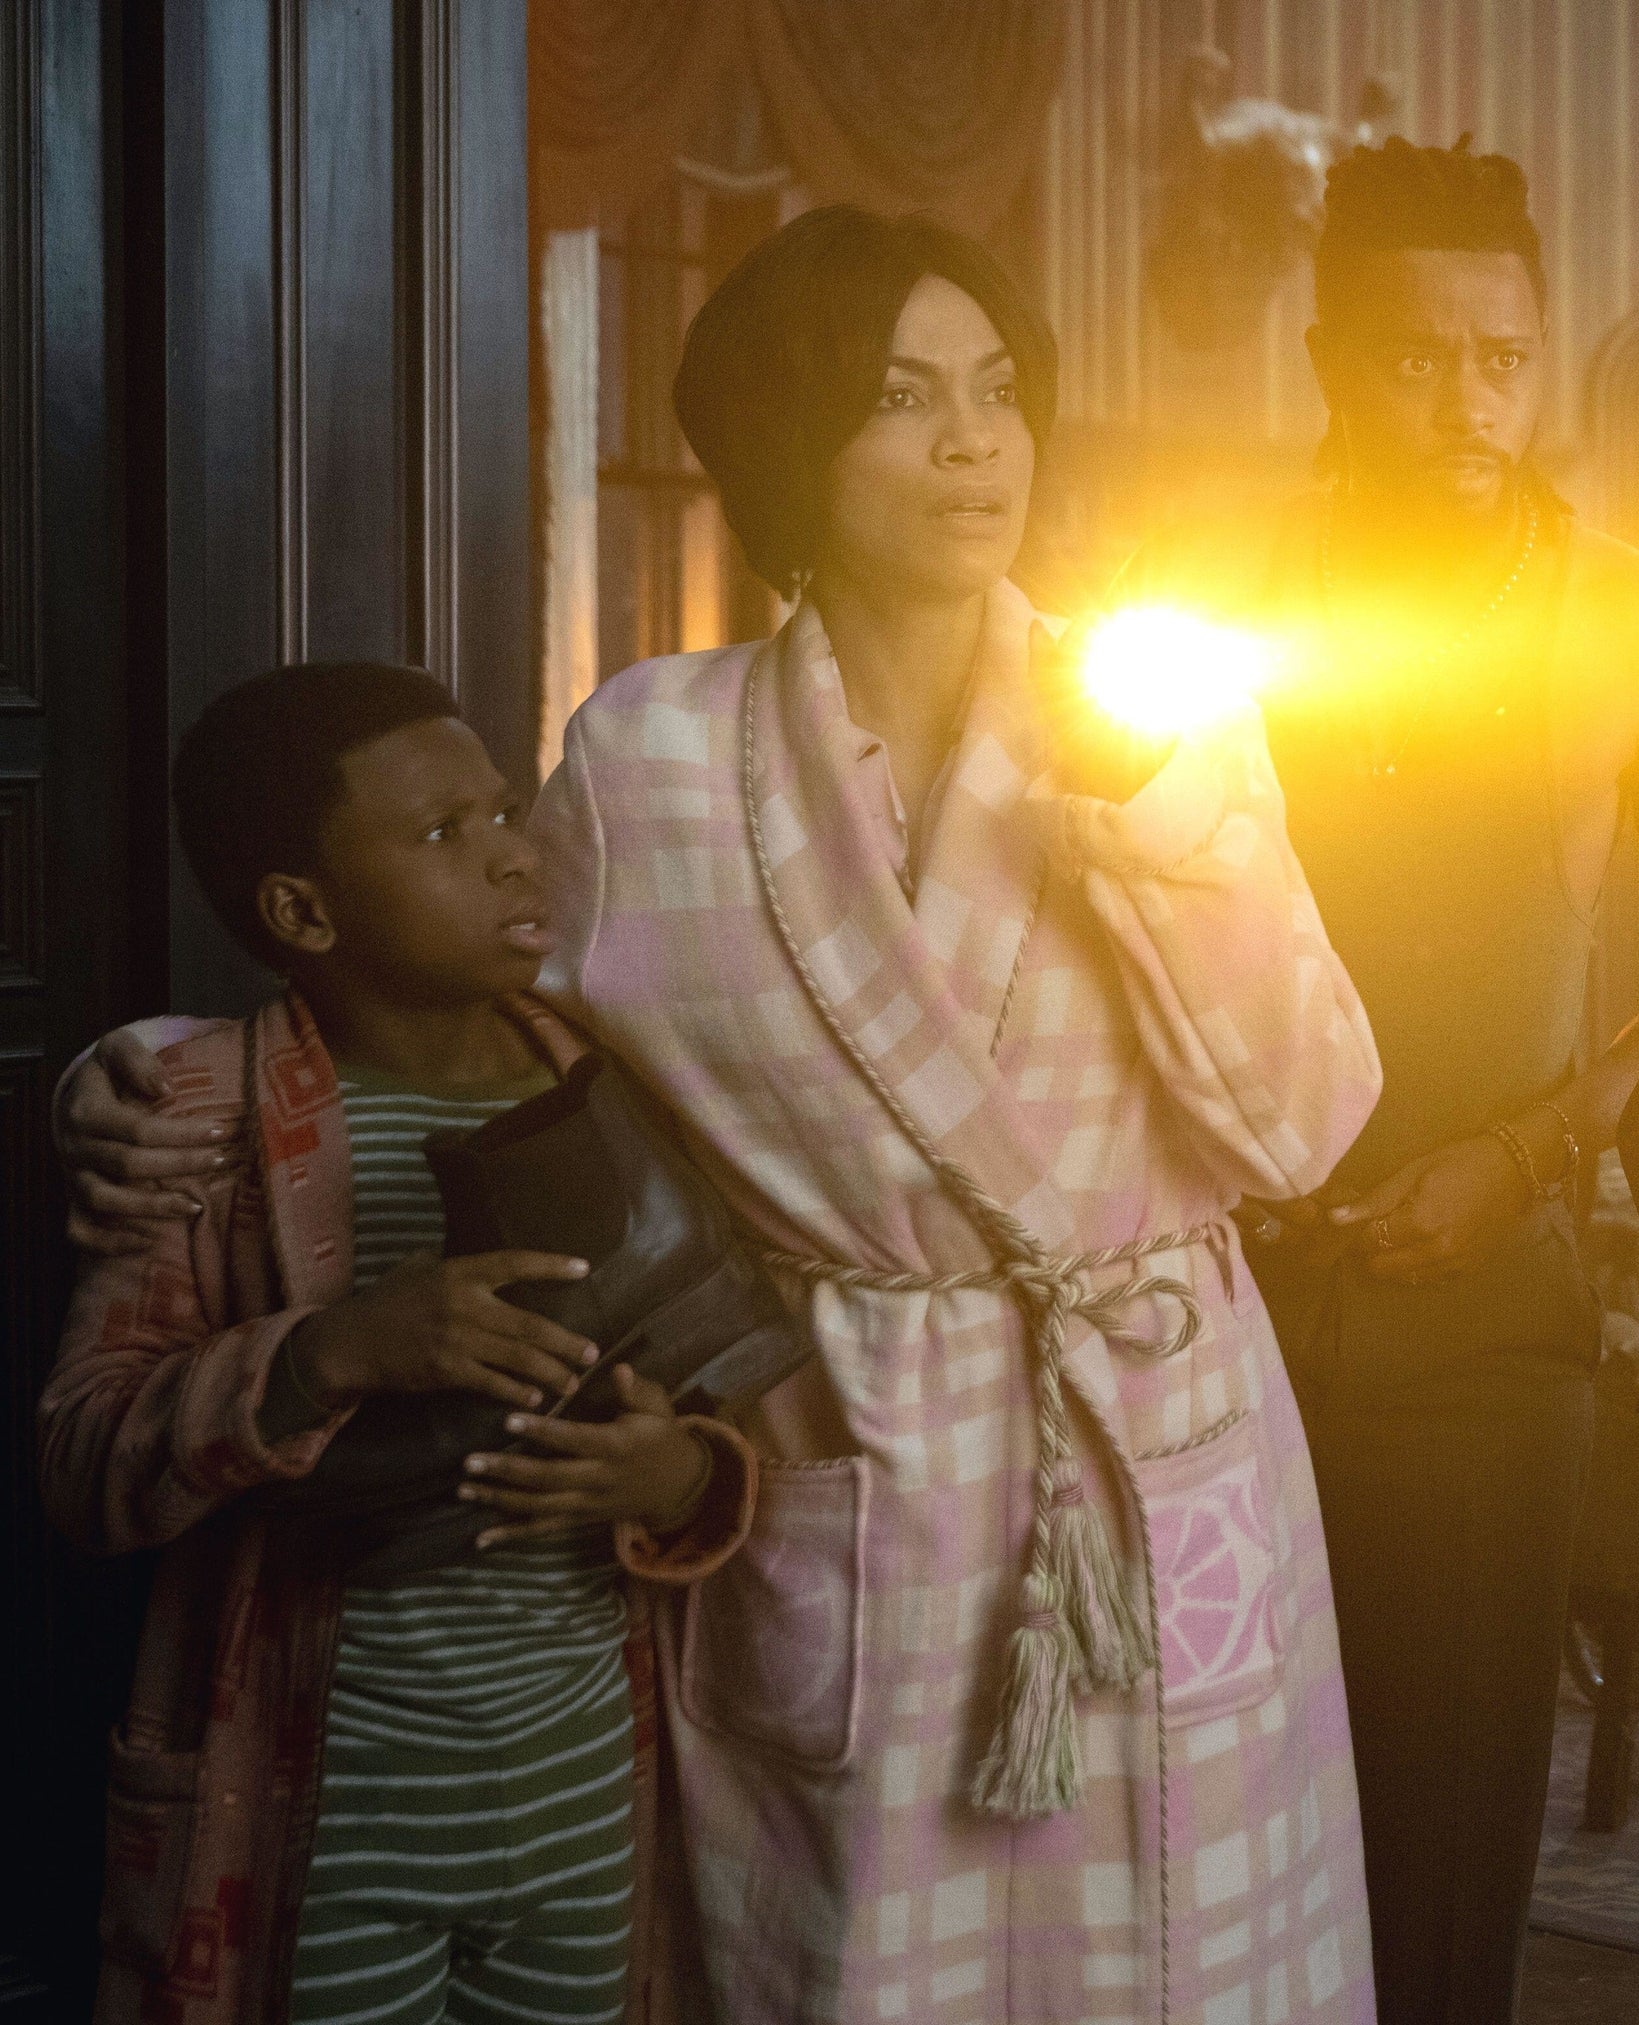 Chase Dillon, Rosario Dawson, and LaKeith Stanfield in Haunted Mansion